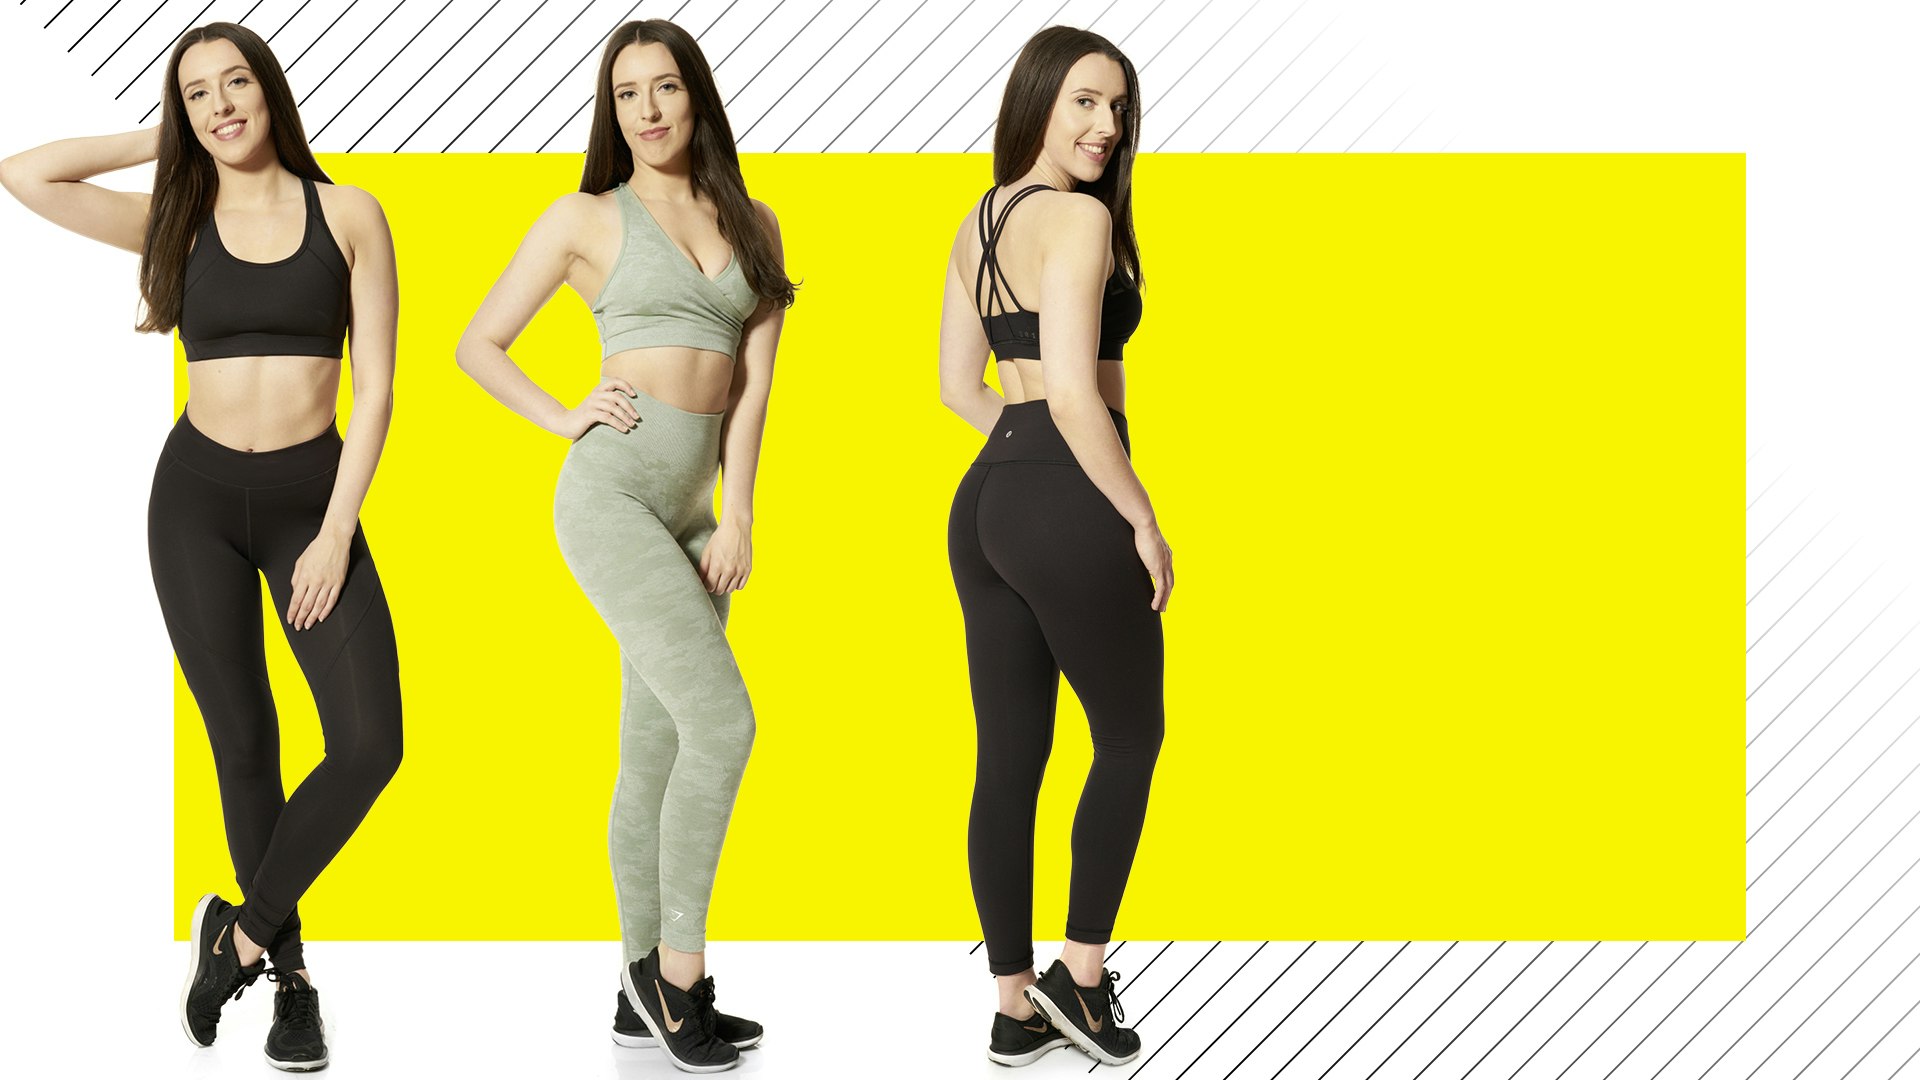 I tried buying the cheapest gym clothes from Primark, Sports